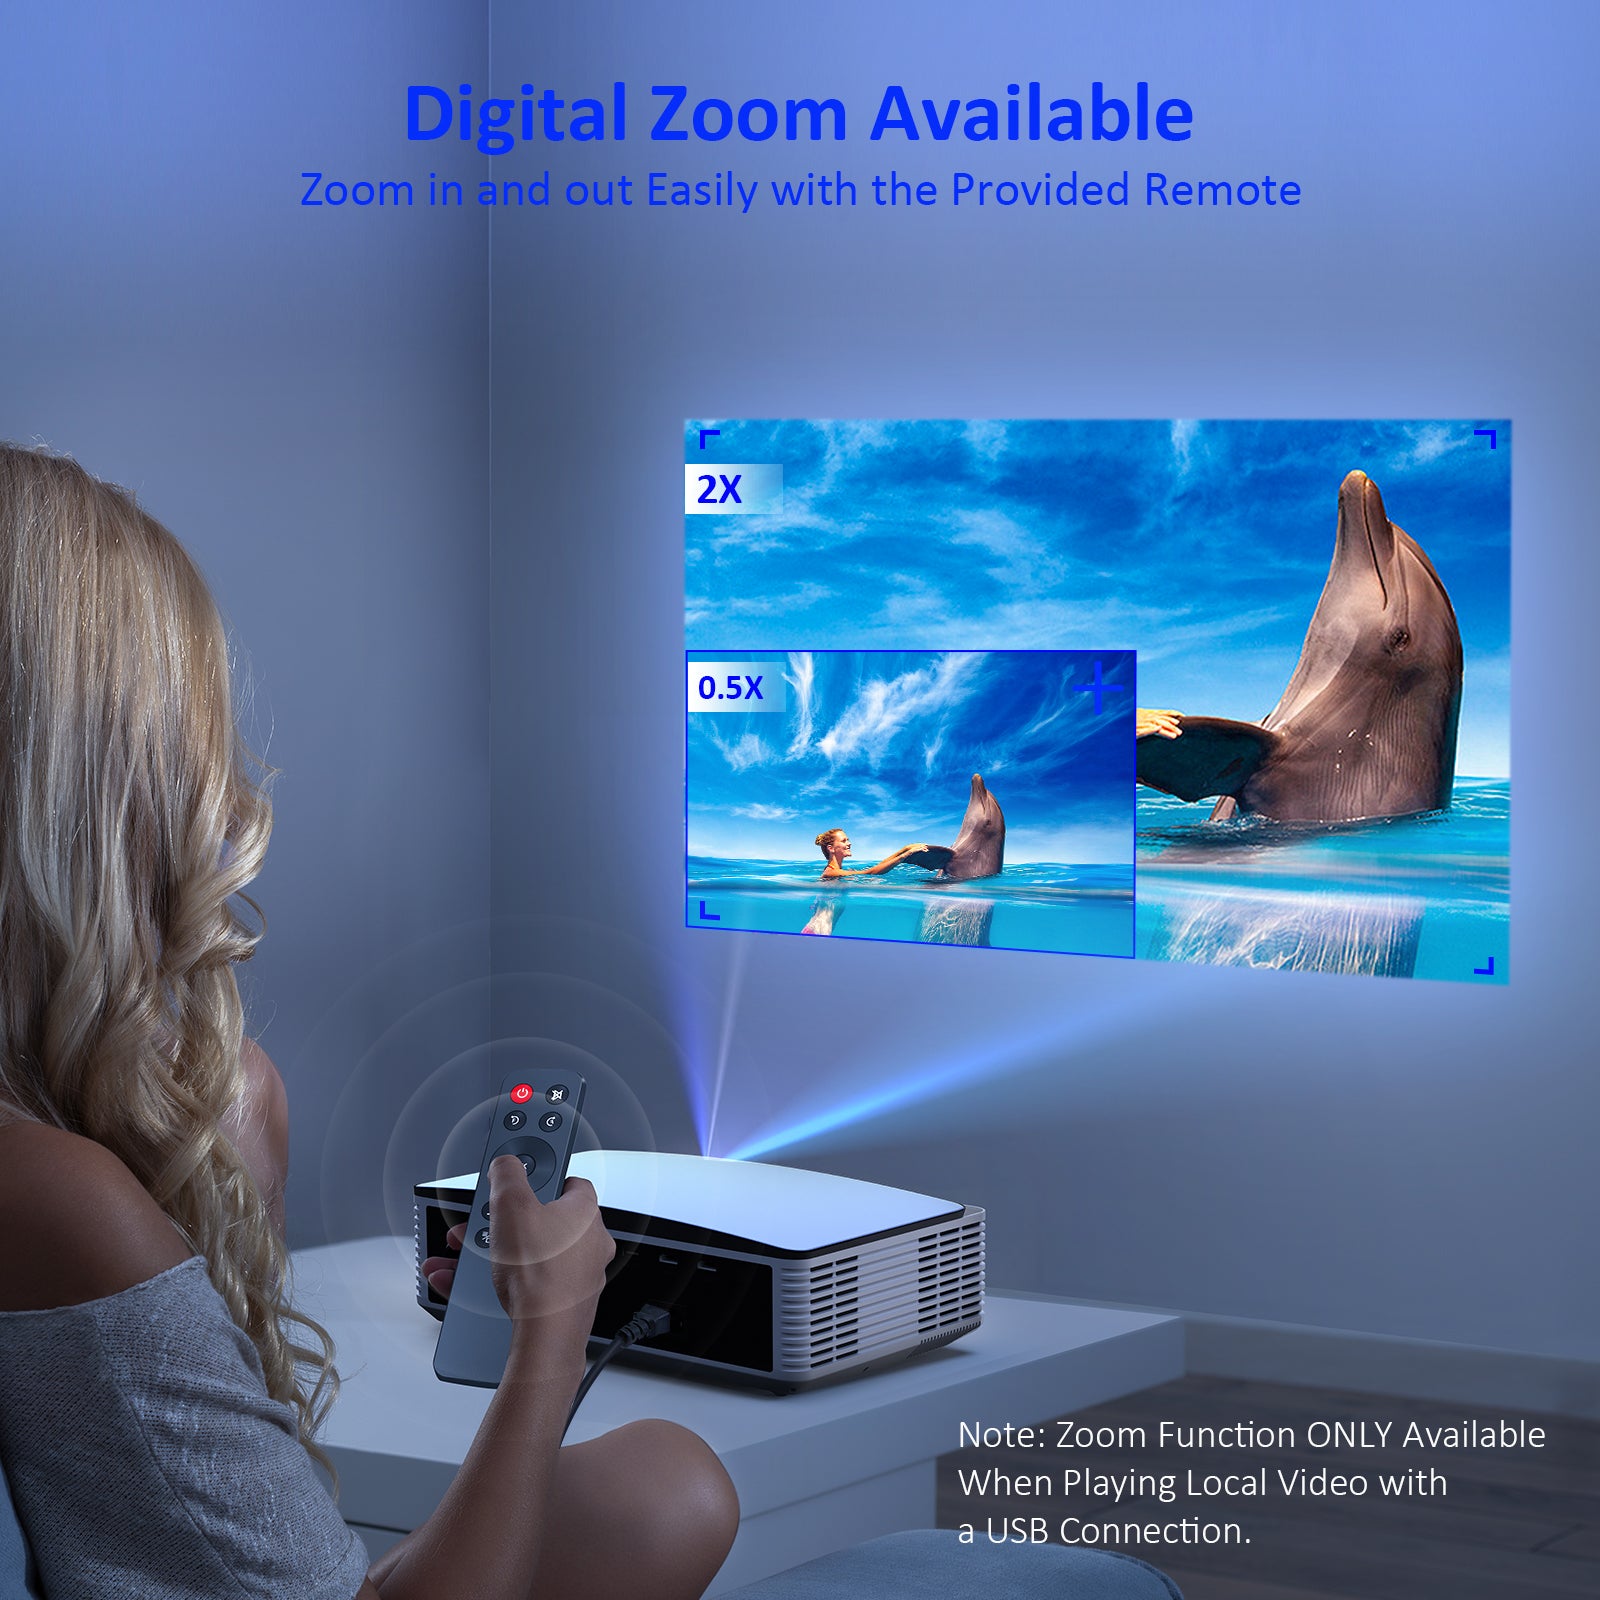 The projection screen size can be easily adjusted using a remote control by a single person.